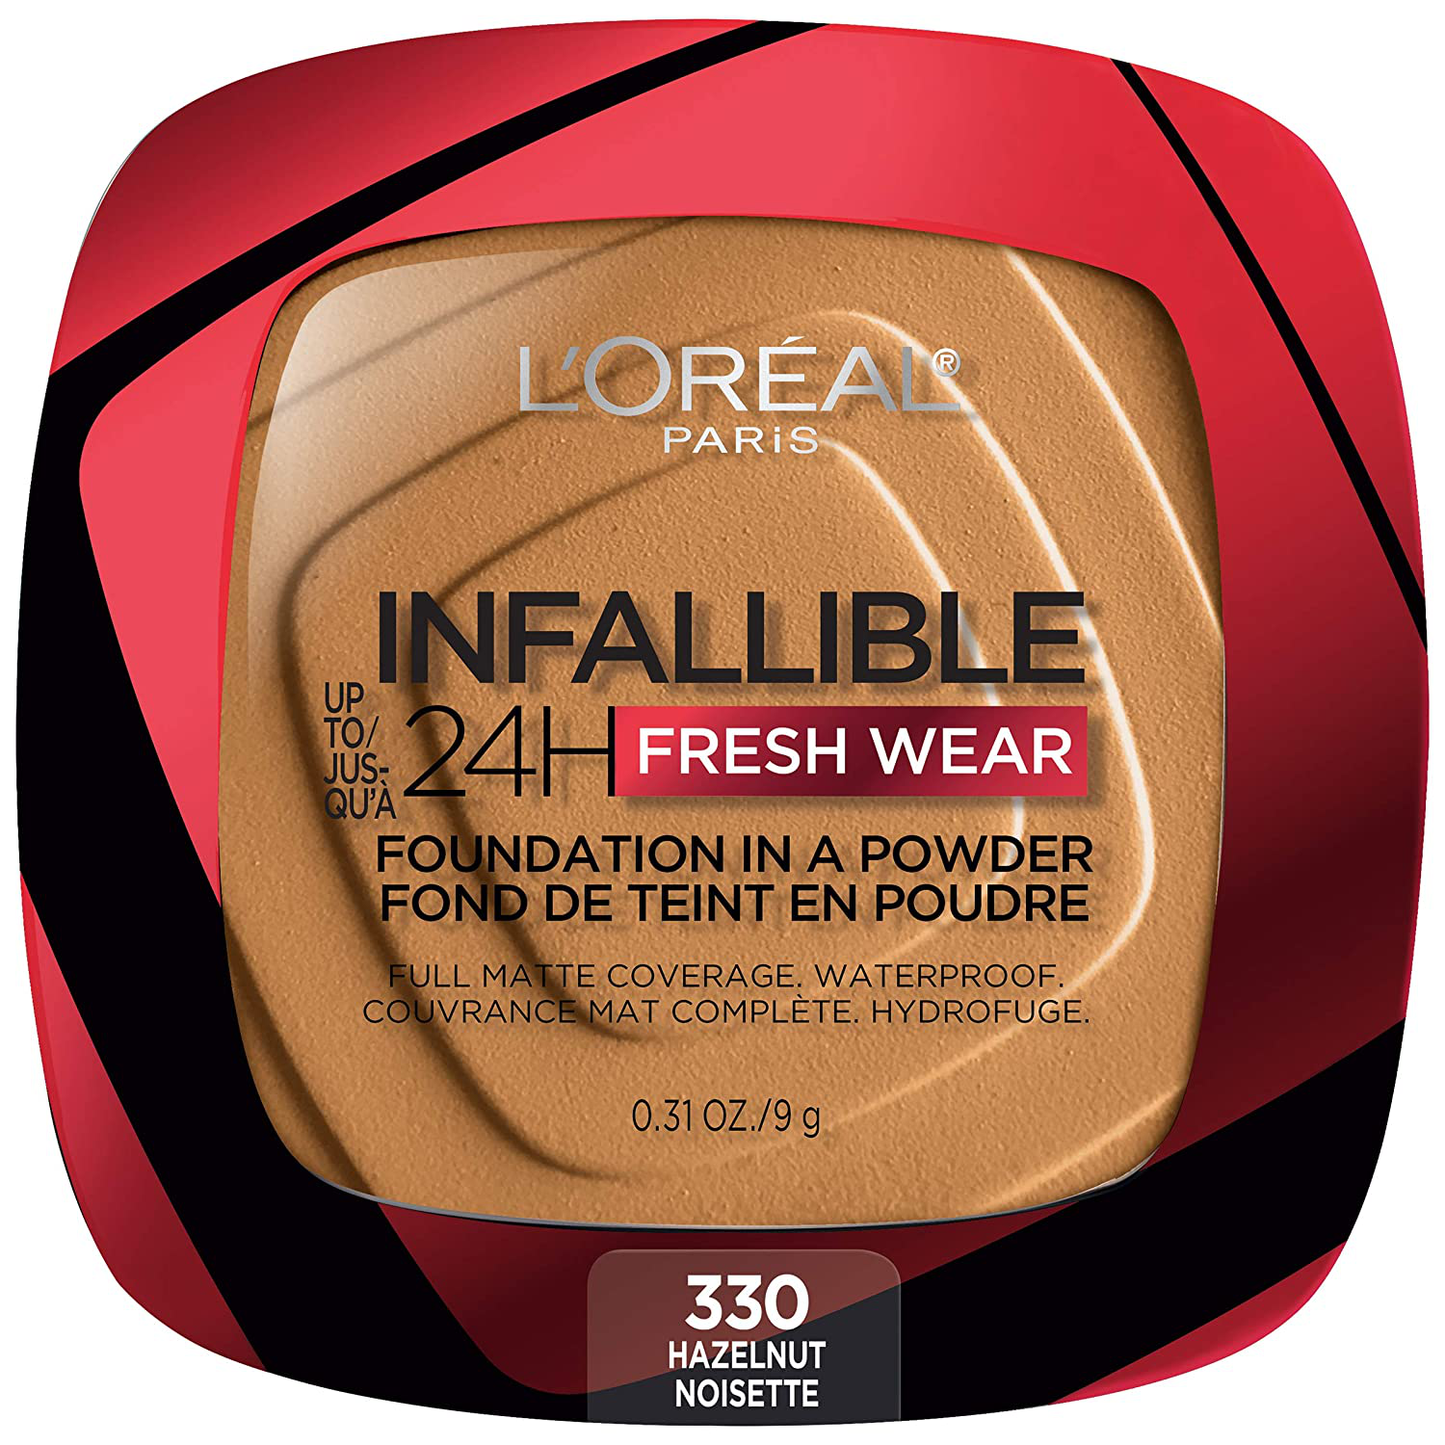 L'Oreal Paris Infallible Fresh Wear Foundation in a Powder, Up to 24H Wear